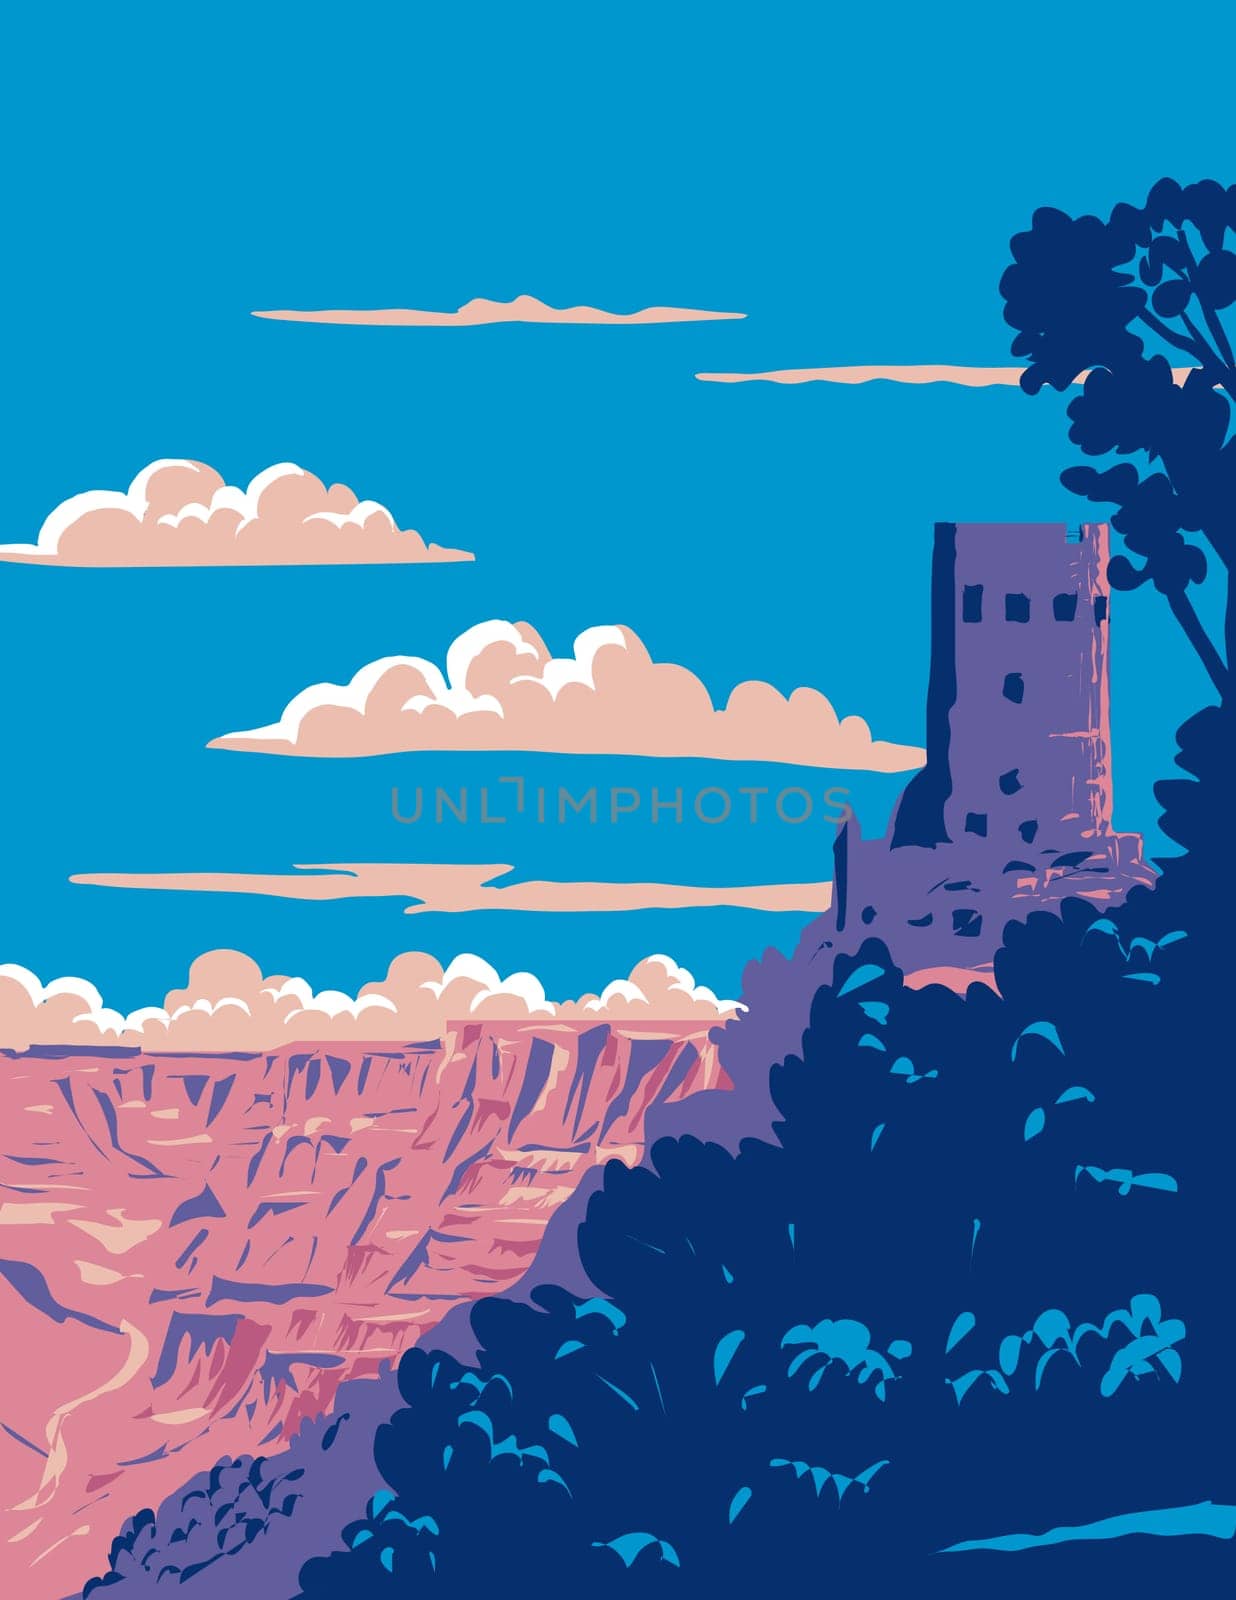 WPA poster art of Desert View Watchtower or the Indian Watchtower on the South Rim of the Grand Canyon National Park, Arizona done in works project administration or federal art project style.
